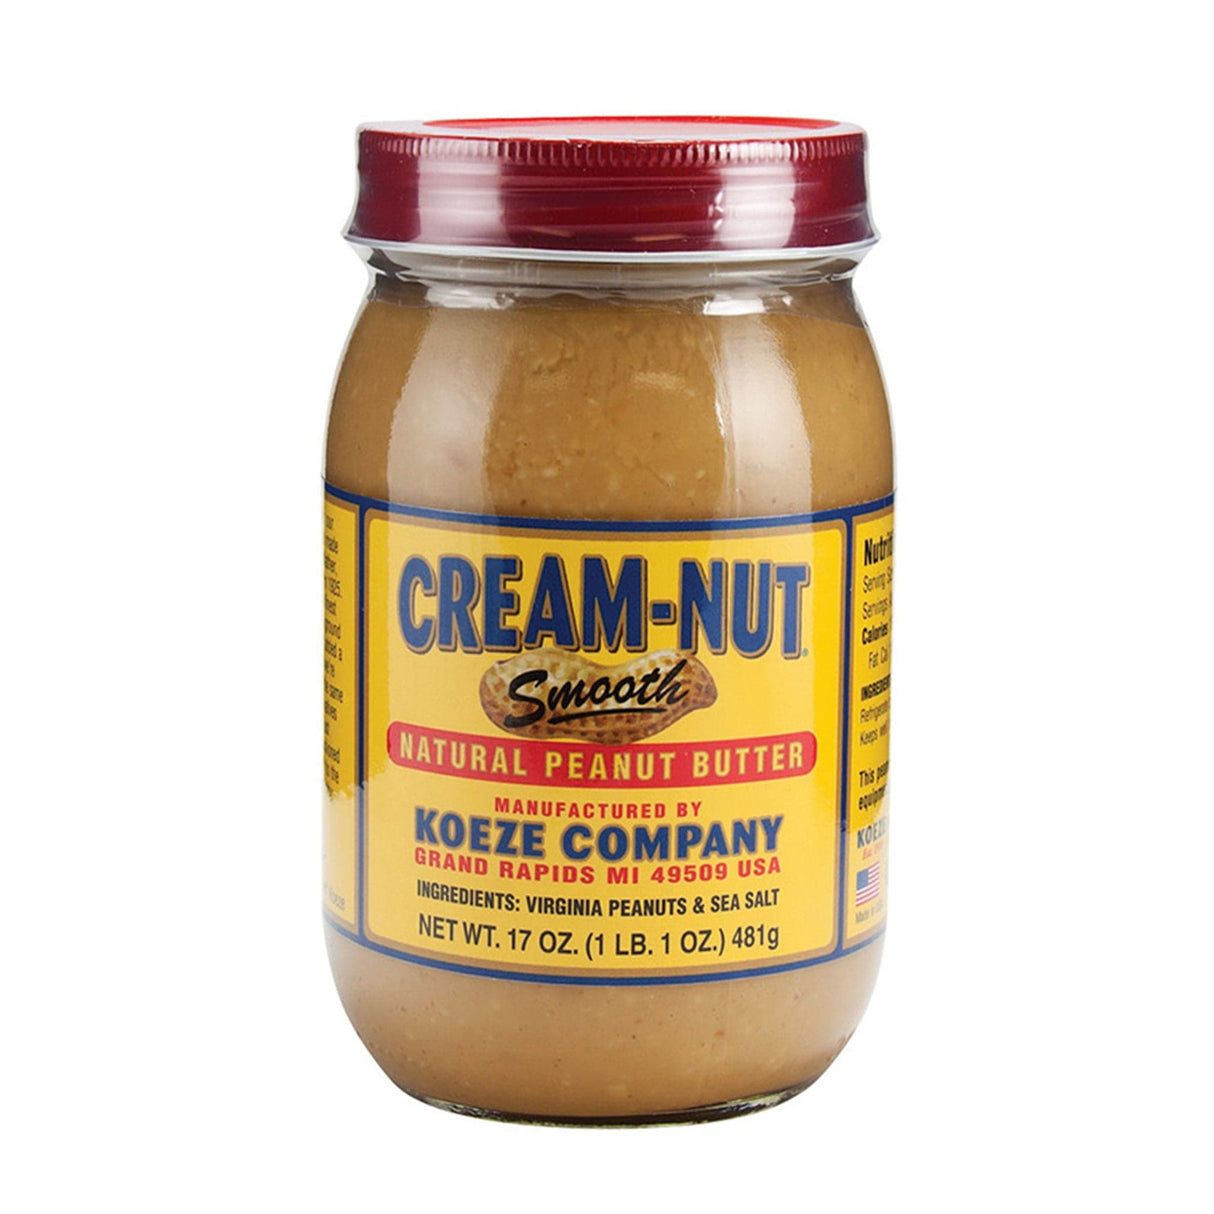 Cream-Nut Smooth Natural Peanut Butter